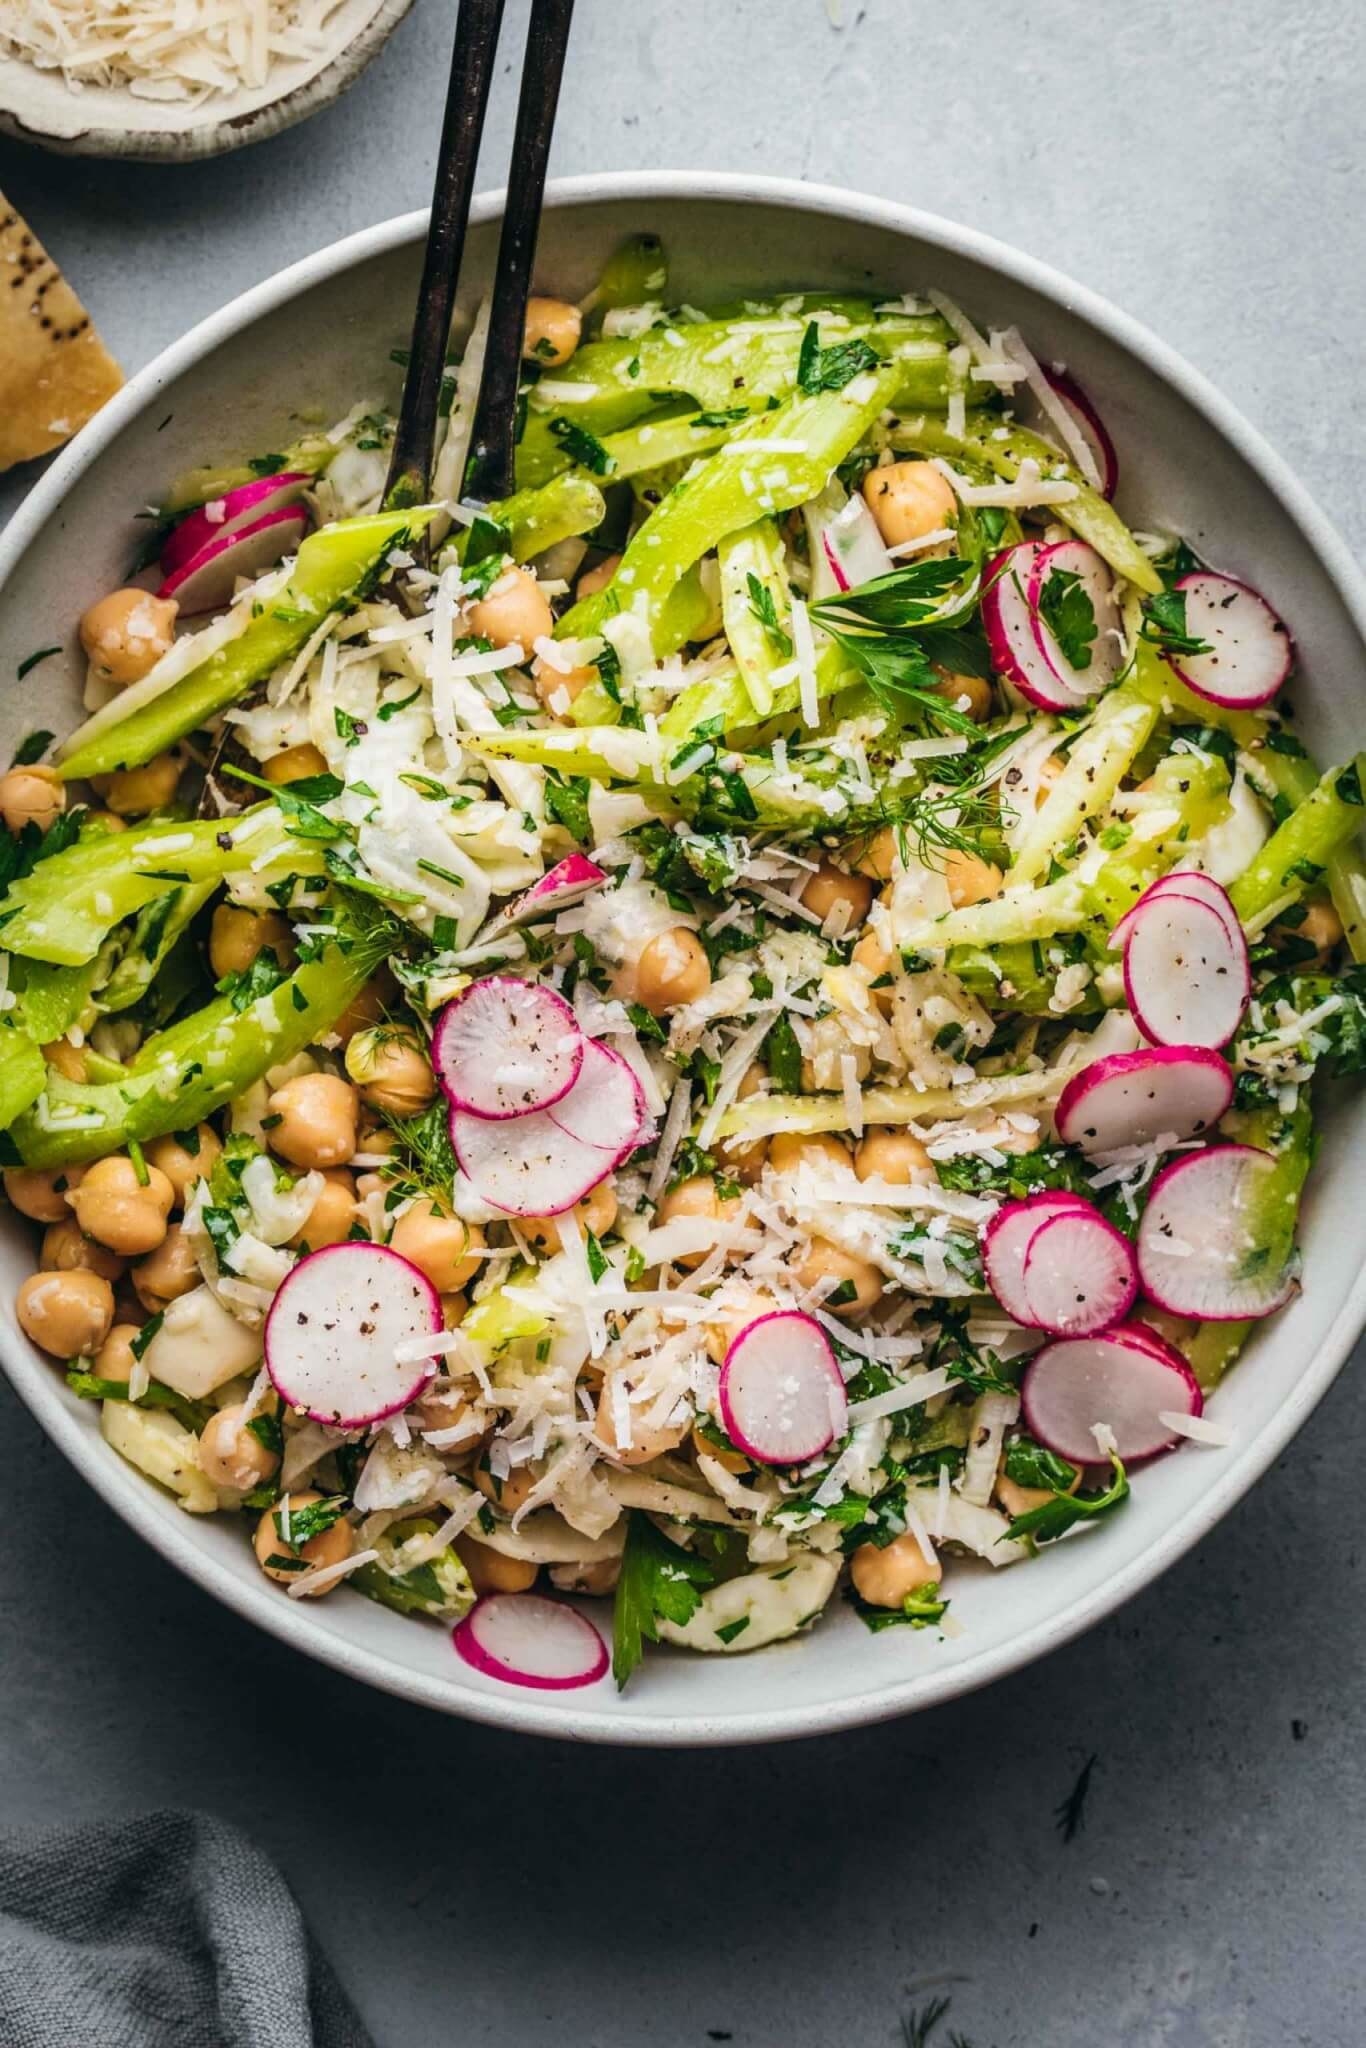 A fennel and chickpea salad with radishes and shaved Parmesan.